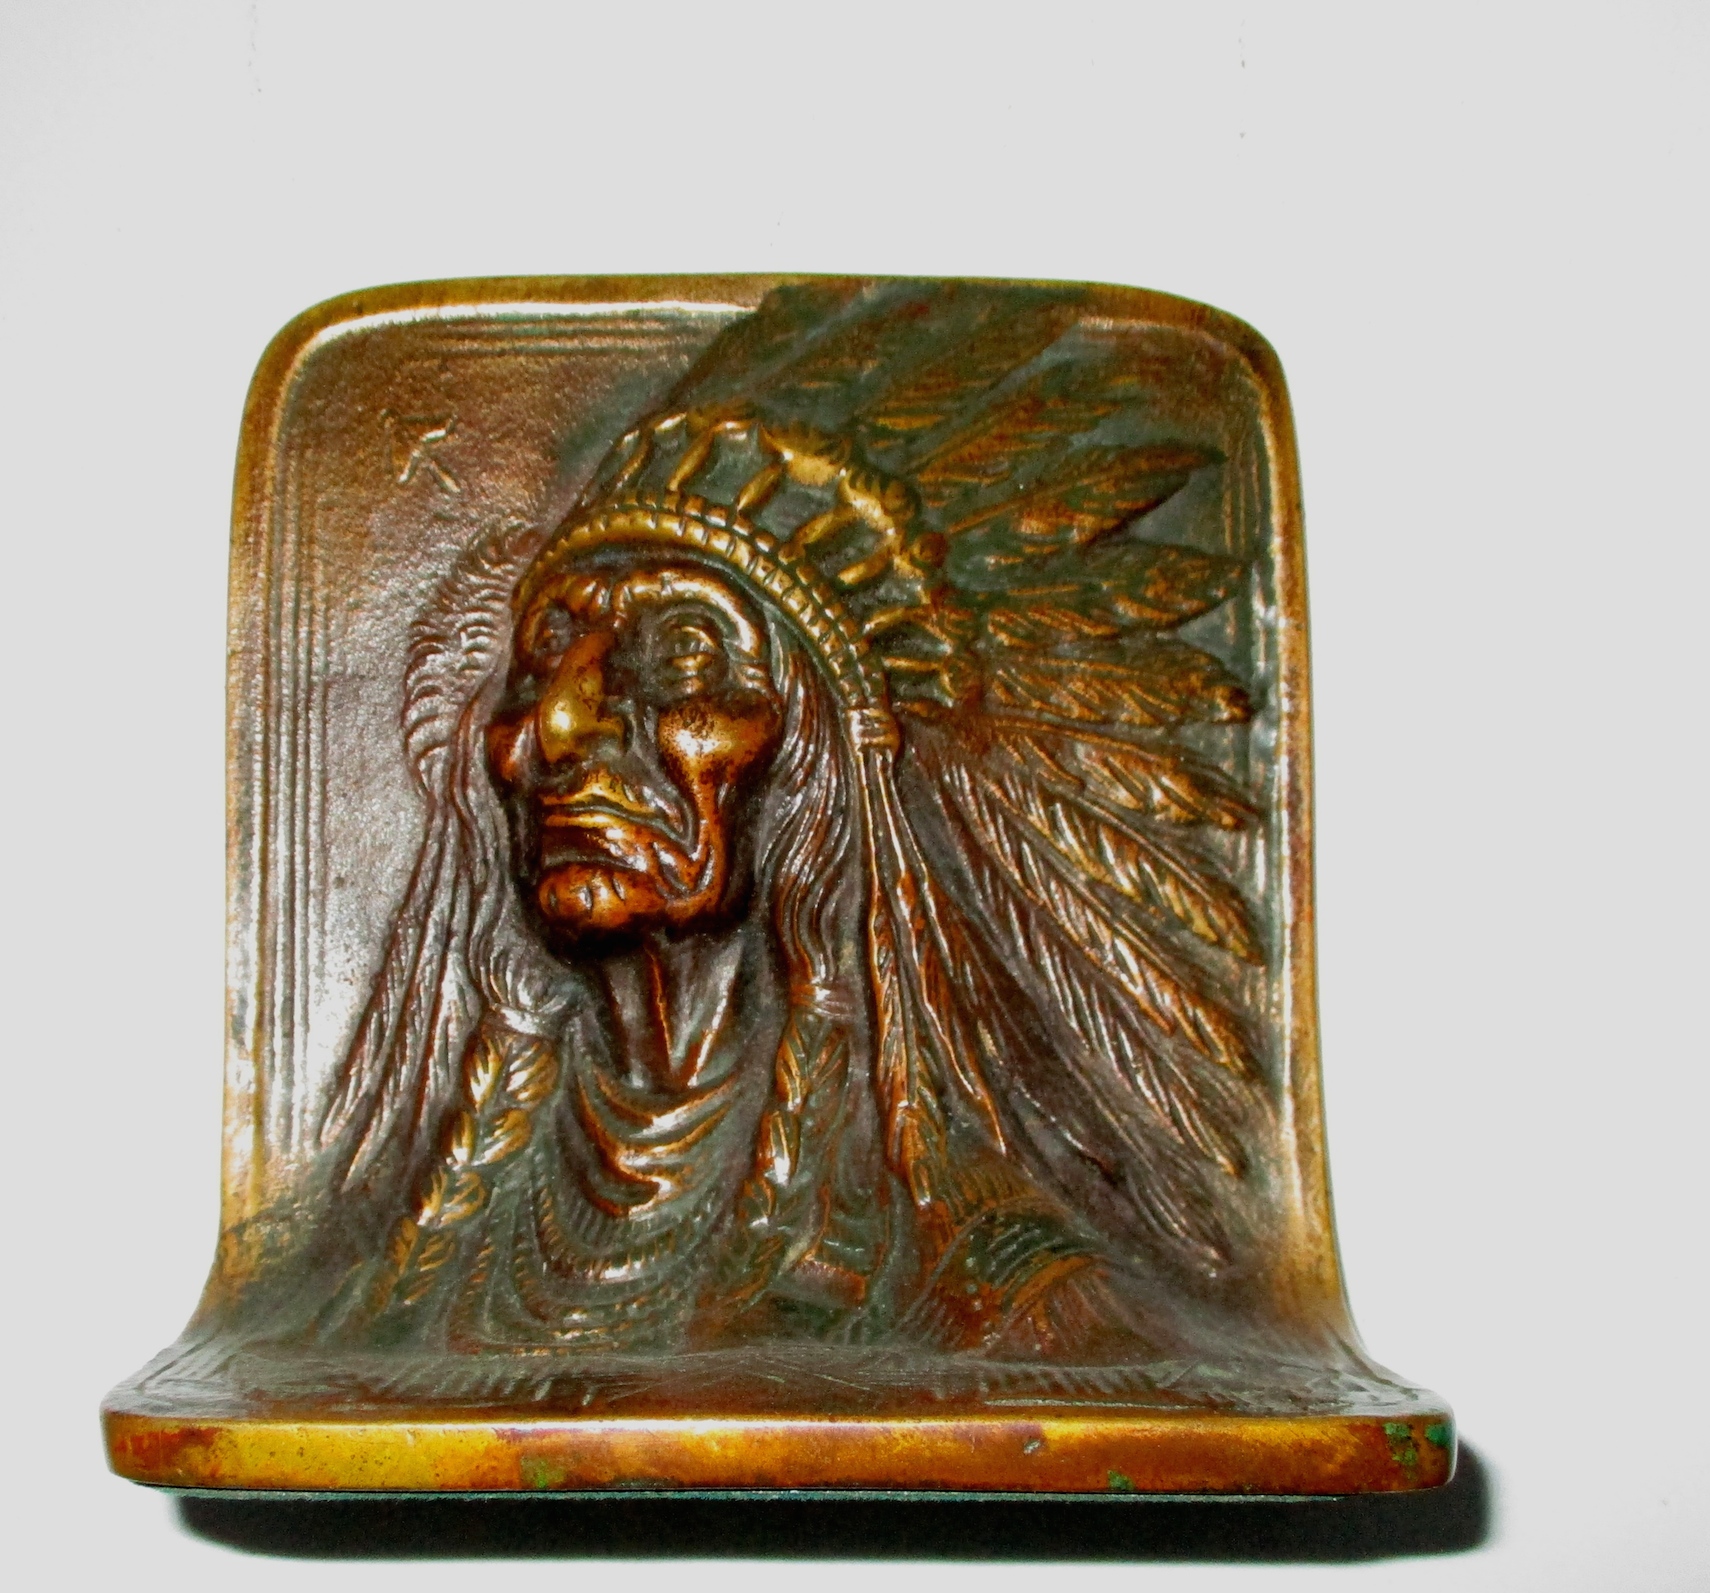 One of a Pair of Indian Chief Bookends (Marked Solid Bronze)